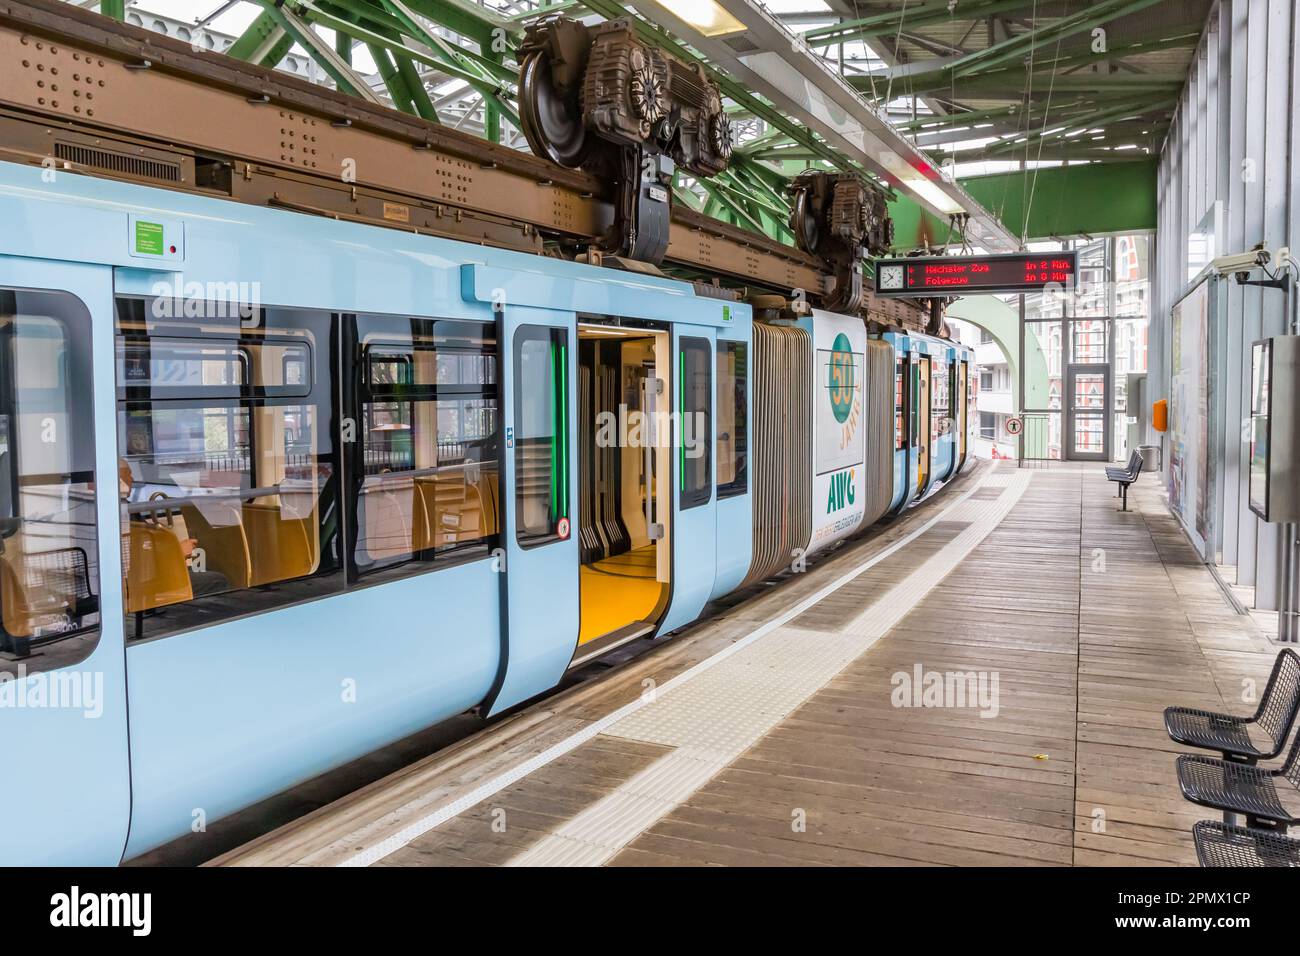 Monorail train at the platform of the main station in Wuppertal, Germany Stock Photo